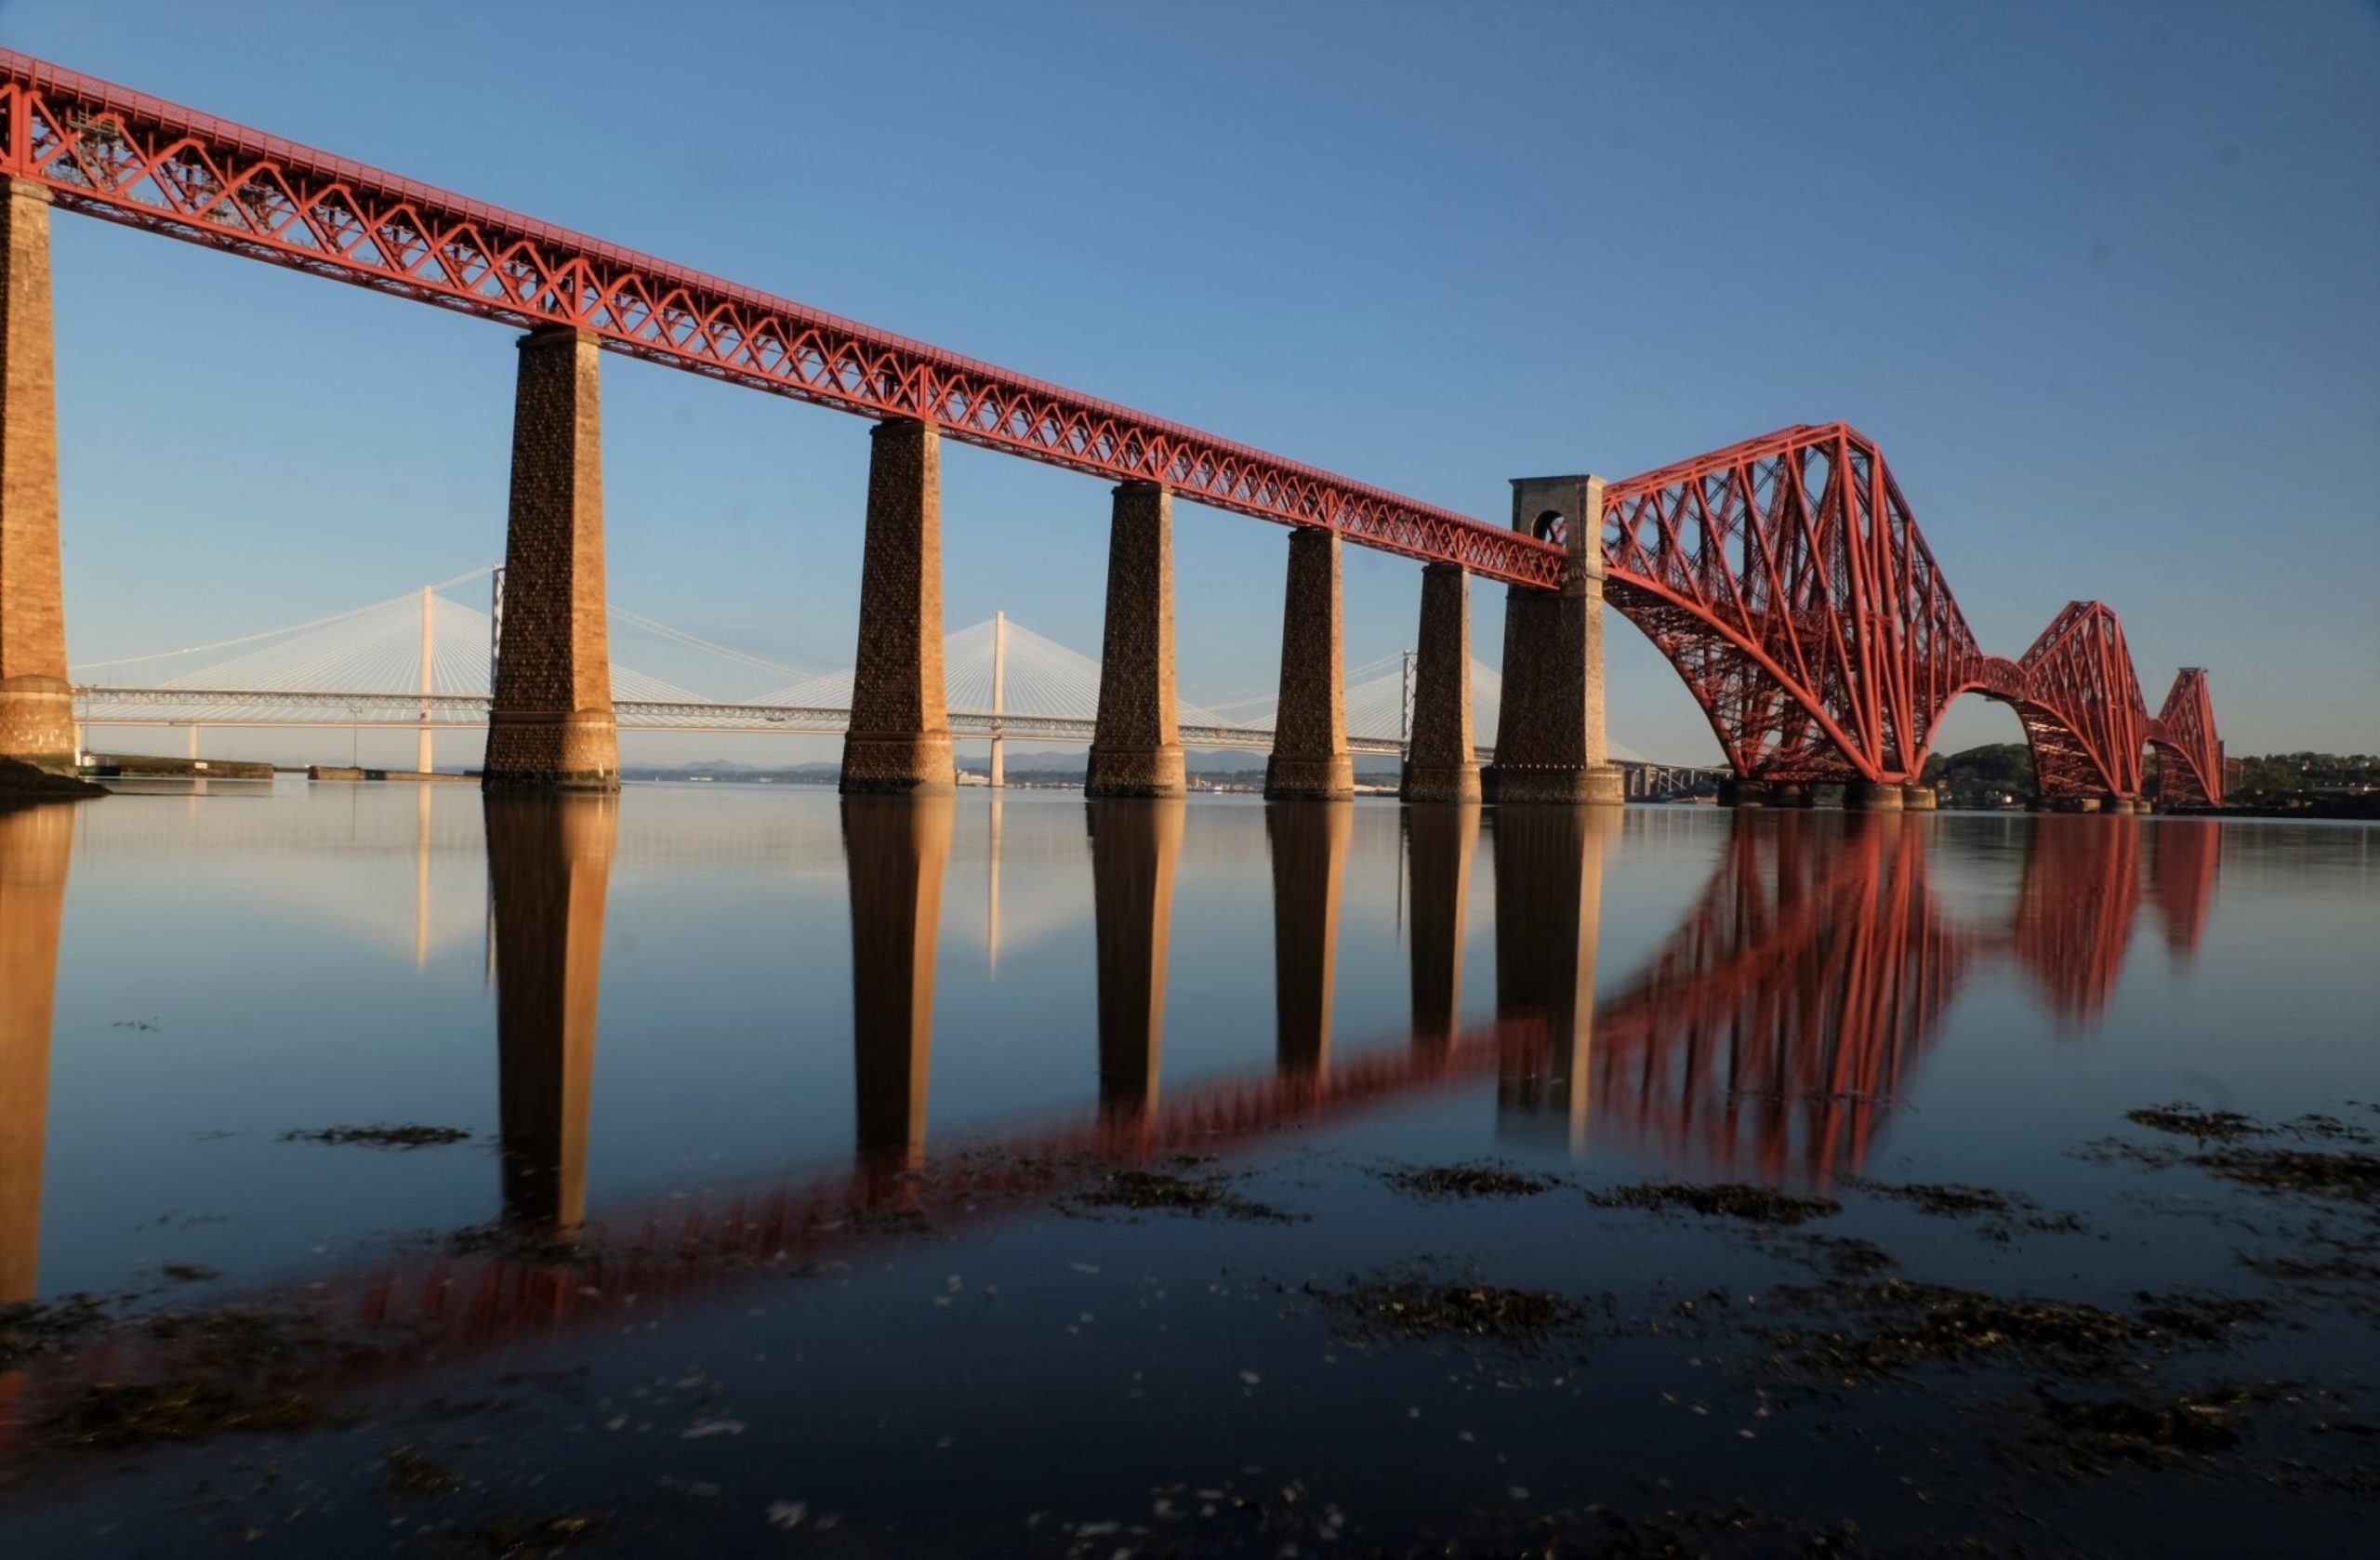 Iconic structure of the forth rail bridge CaSE civil and structural engineering project